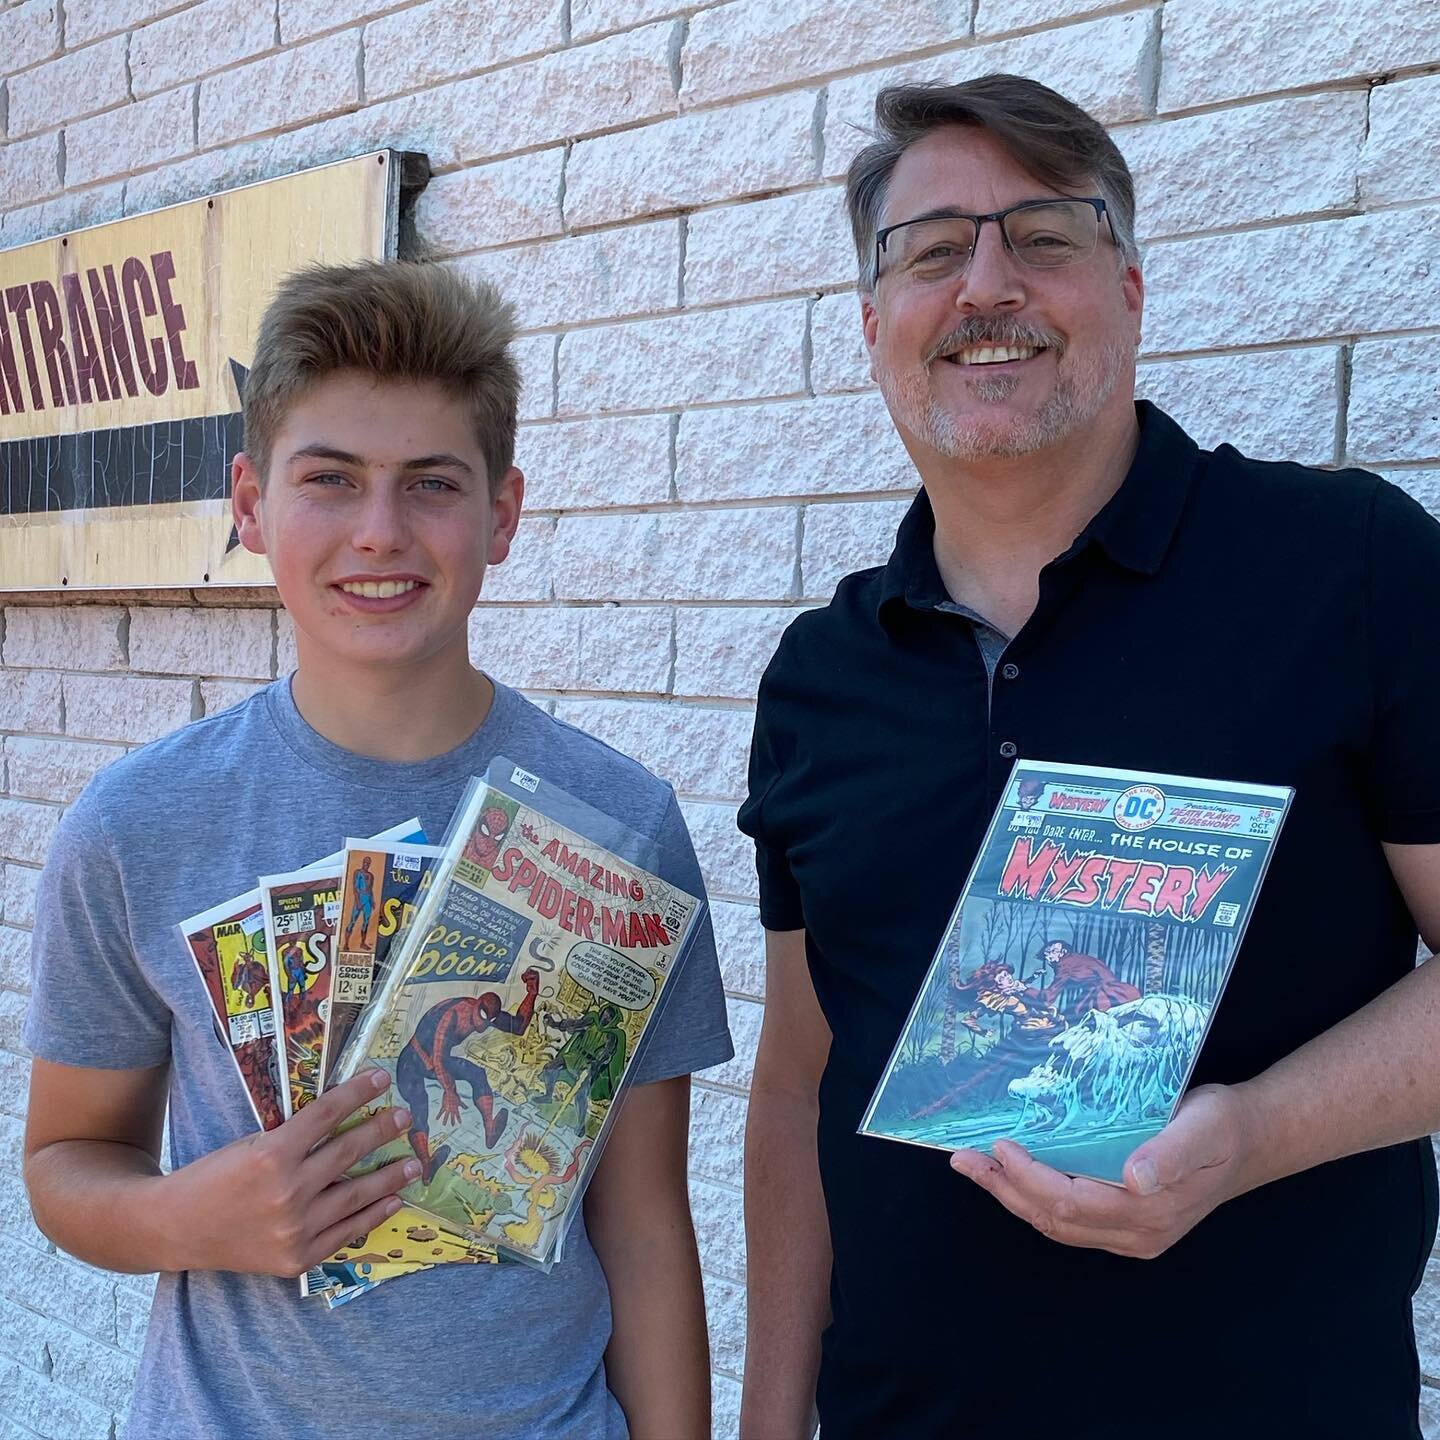 Happy birthday Matthew!!! &ldquo;Young Matthew&rdquo; made the trek to Sacramento from San Jose to meet for lunch and make a visit to @a1comics to dig through their back issues. Check out @matthewstivaletti.art and his newest additions to his Amazing